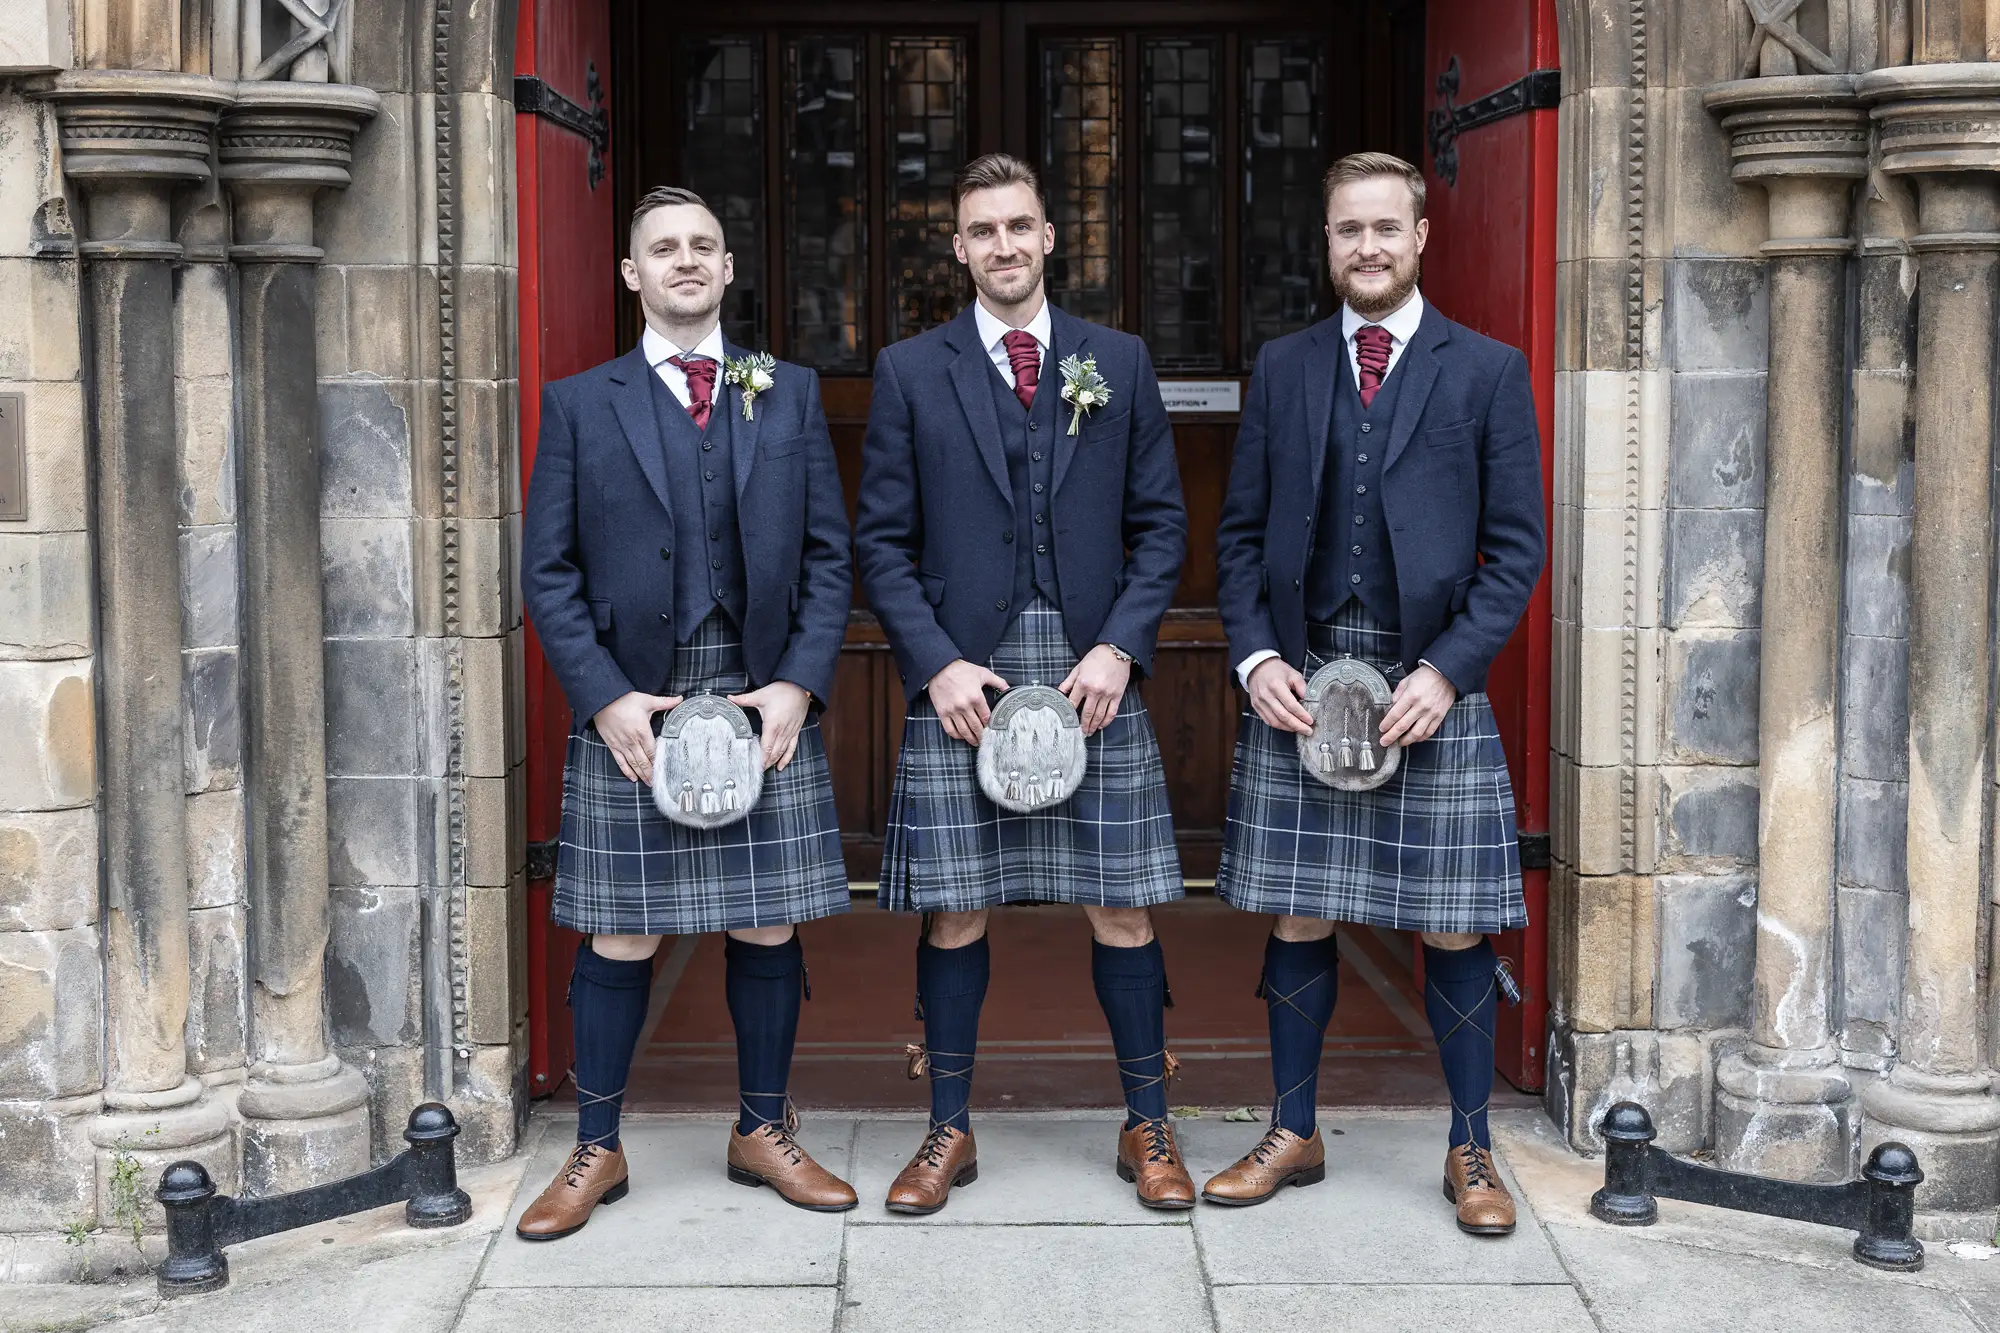 Three men in traditional scottish kilts and jackets stand in front of a church's ornate red doors, each wearing a boutonniere and holding a sporran.